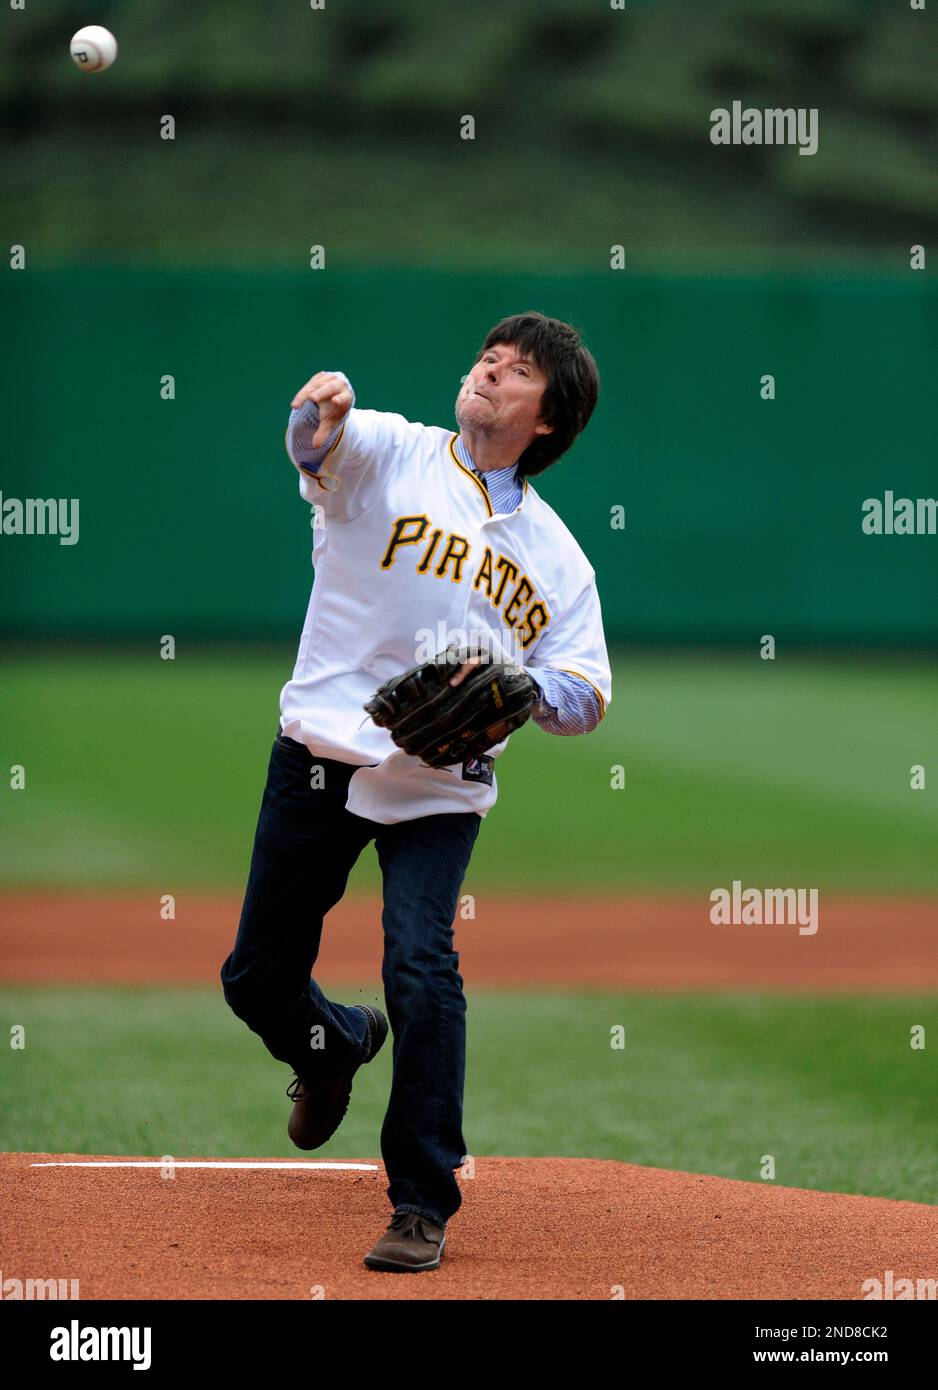 Documentary filmmaker Ken Burns throws out the ceremonial first pitch before a baseball game between the New York Mets and the Pittsburgh Pirates, Sunday Aug